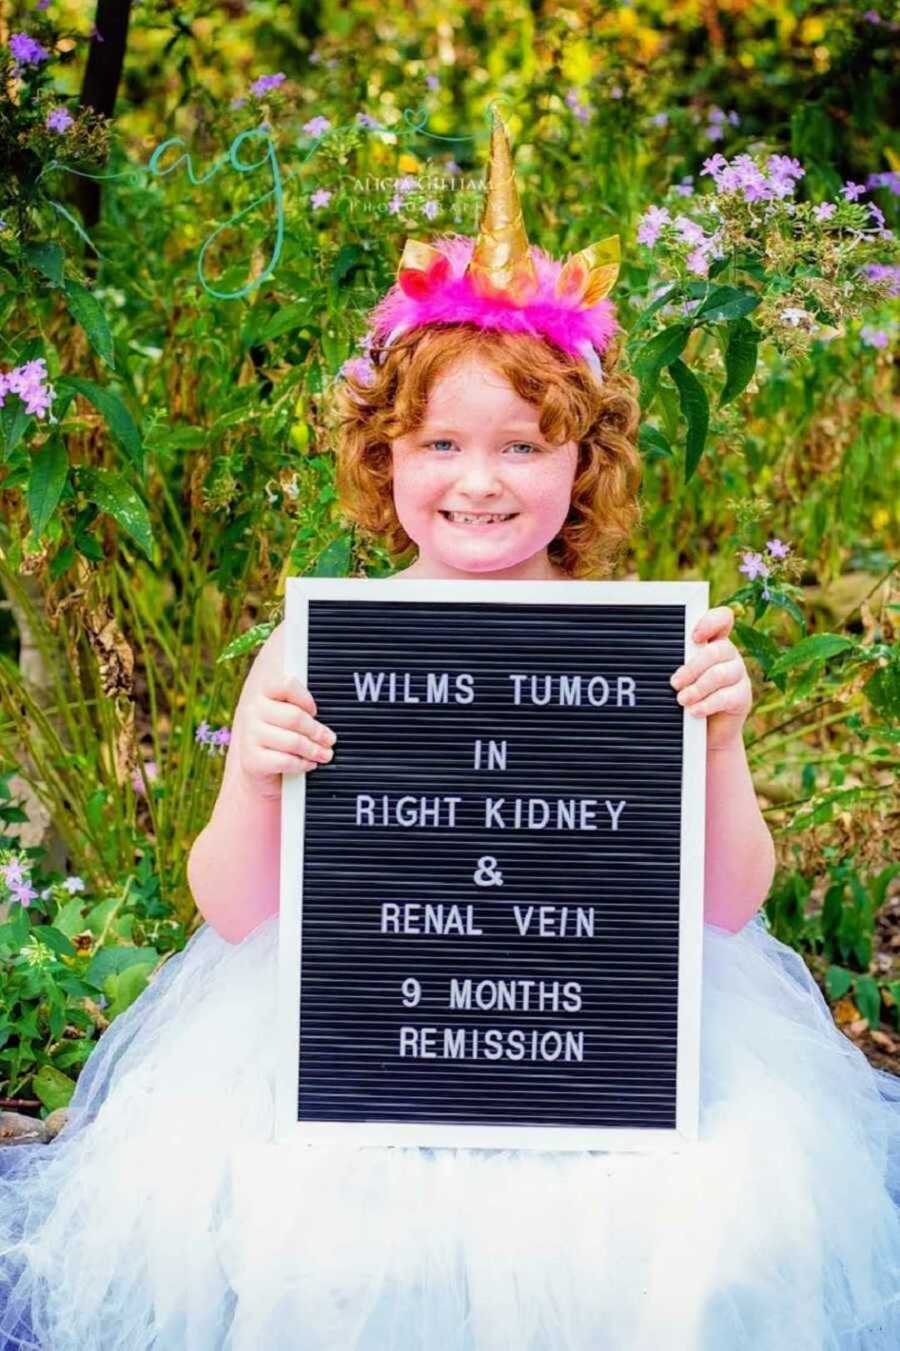 girls stands with sign that signs "wilms tumor in right kidney & renal vein. 9 months remission"